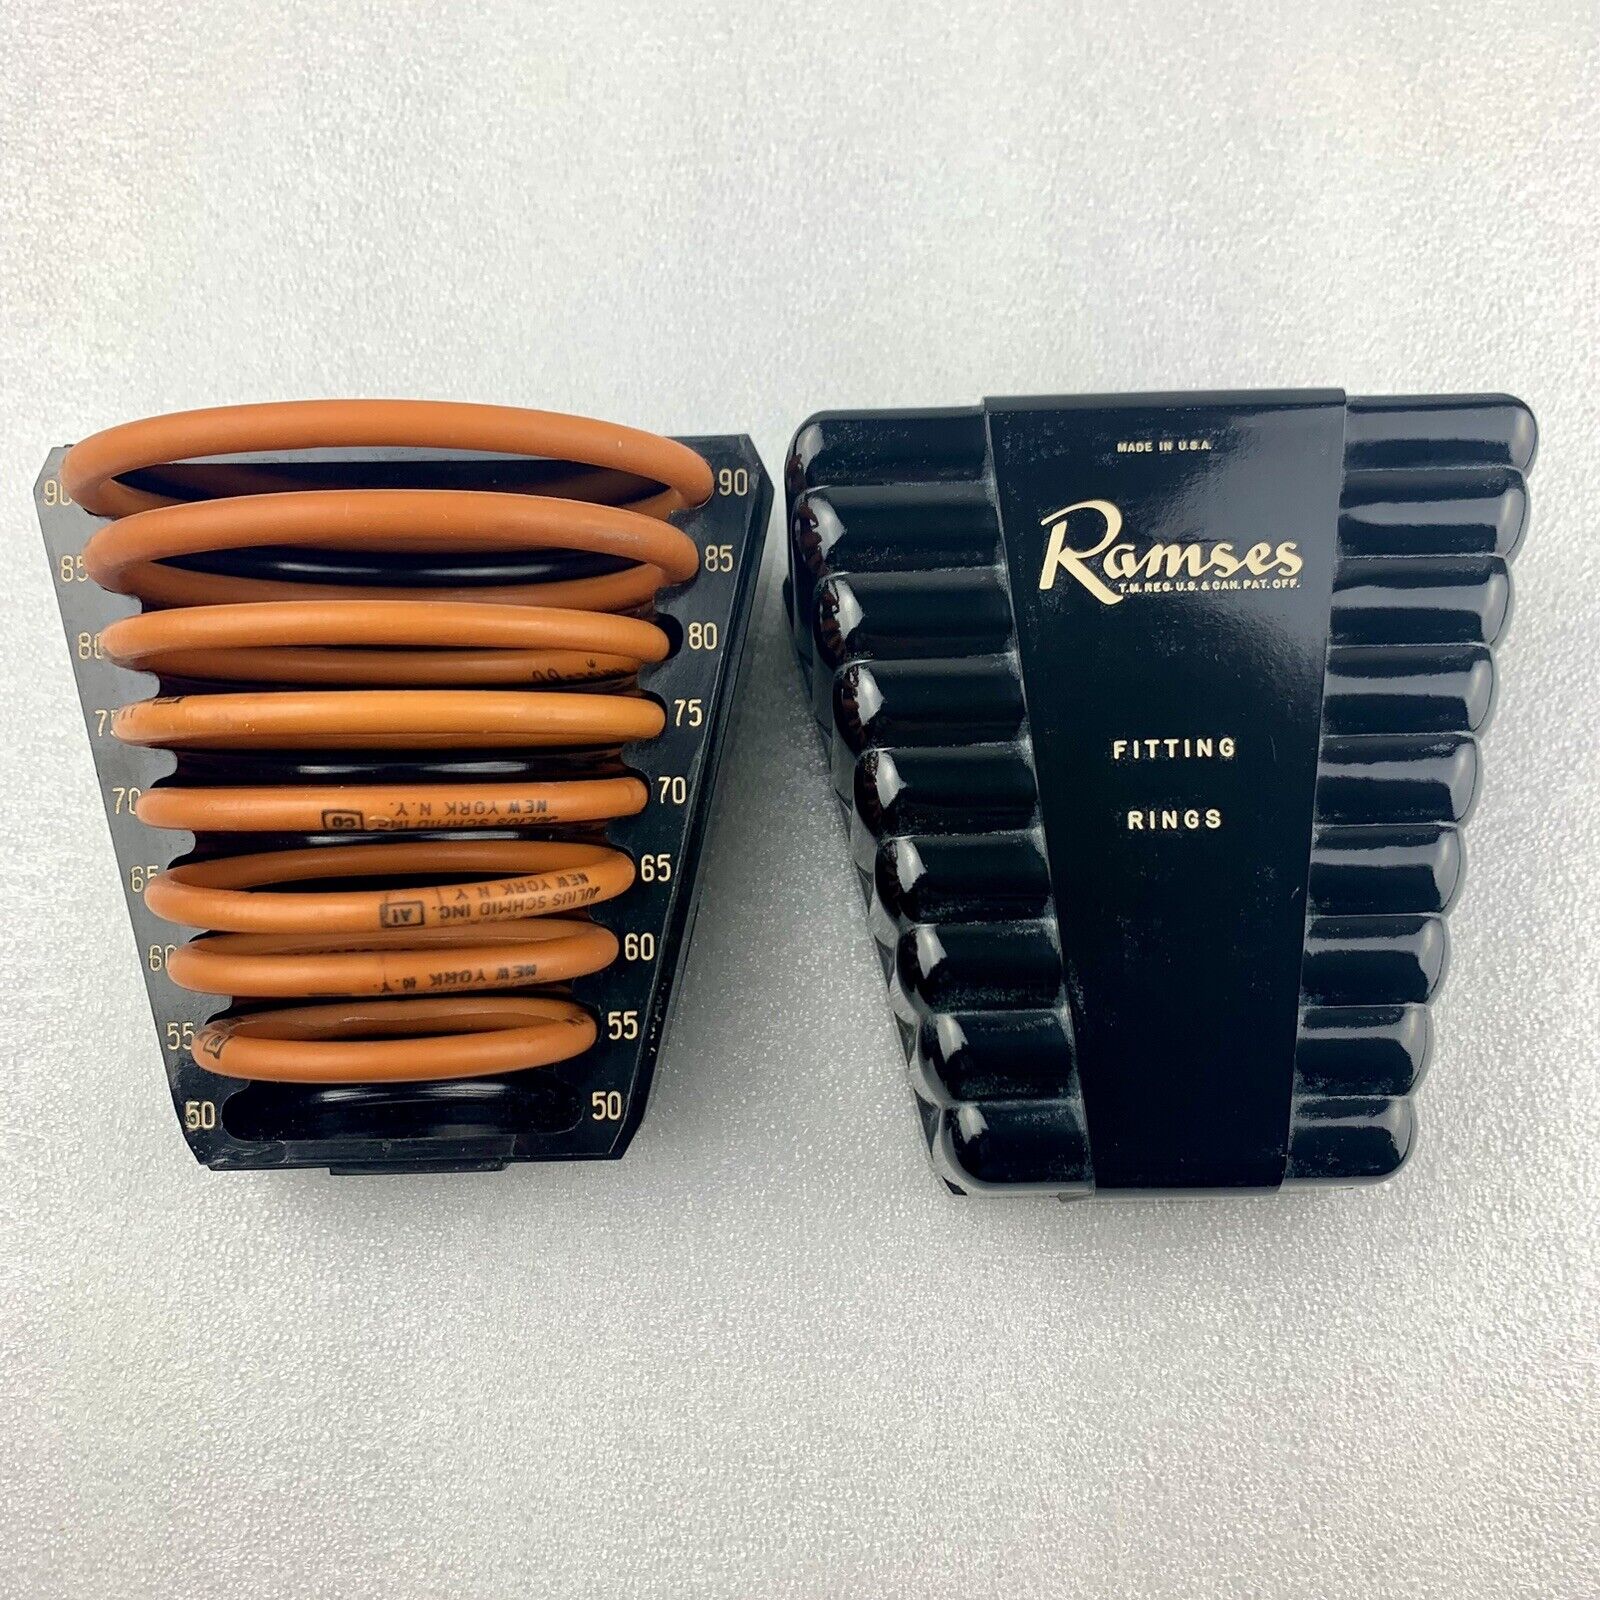 Ramses Vintage Fitting Rings Contraception Gynecological Diaphragm Bakelite Box